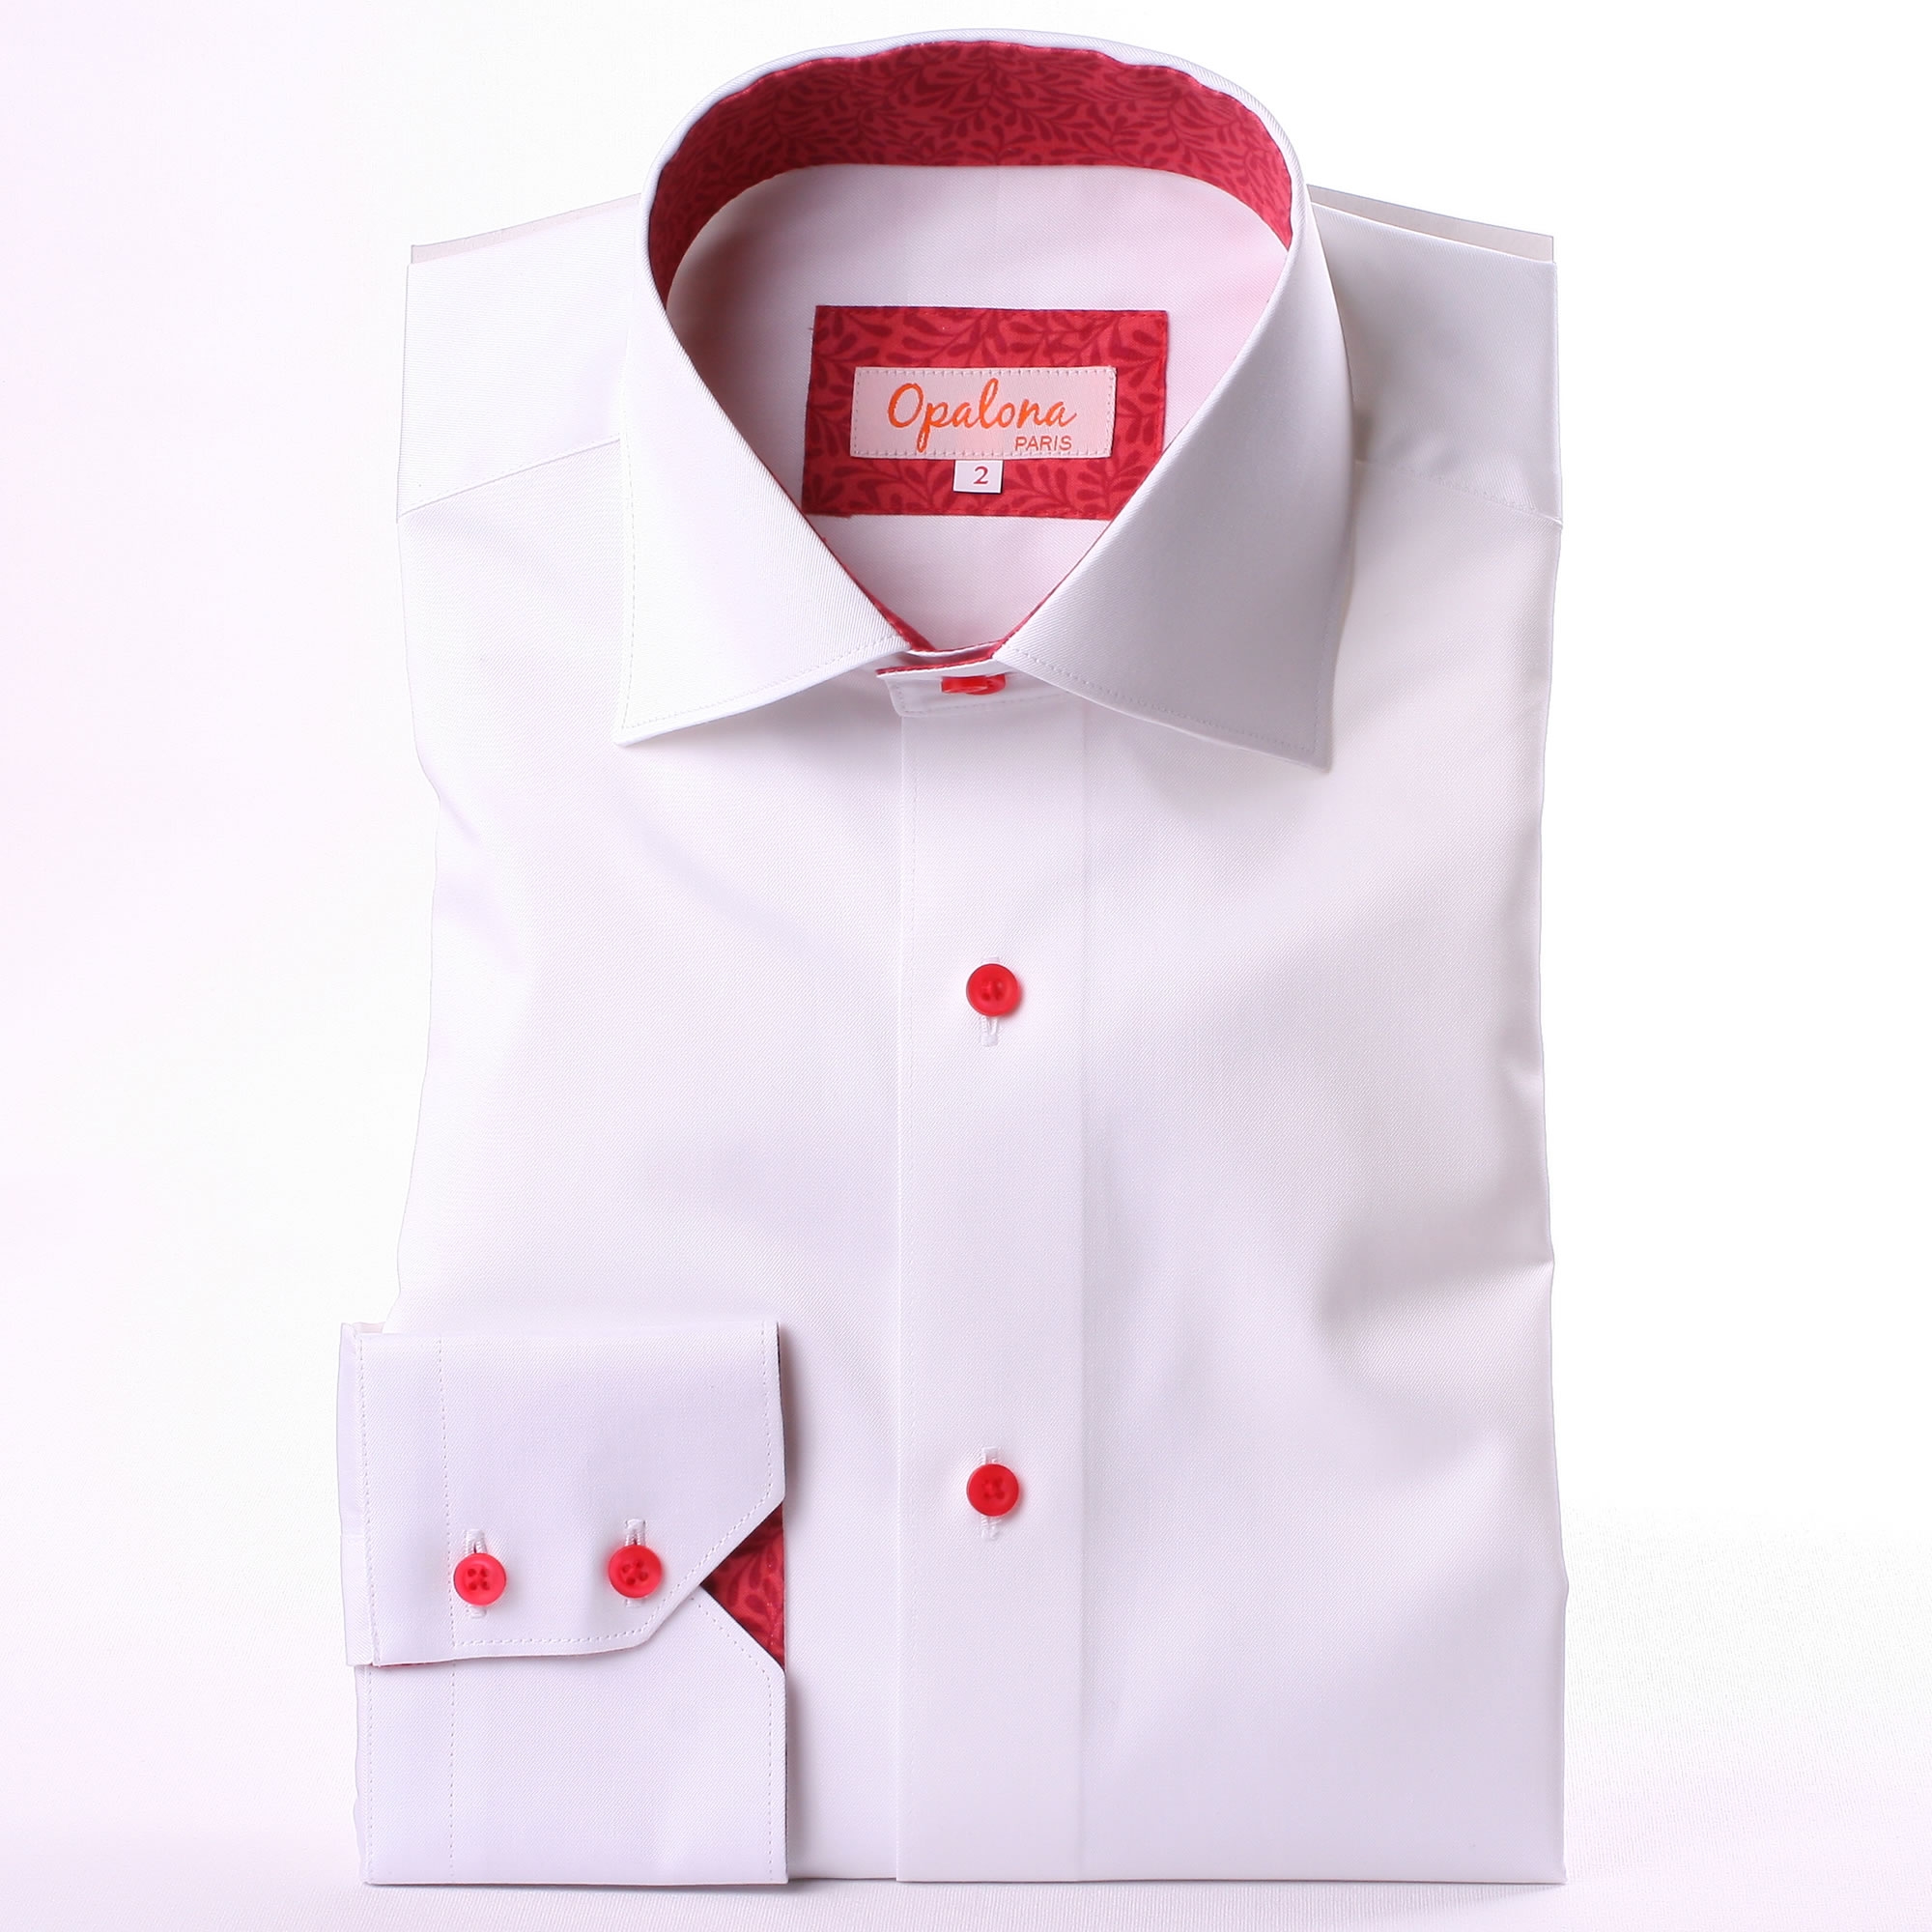 white and red button up